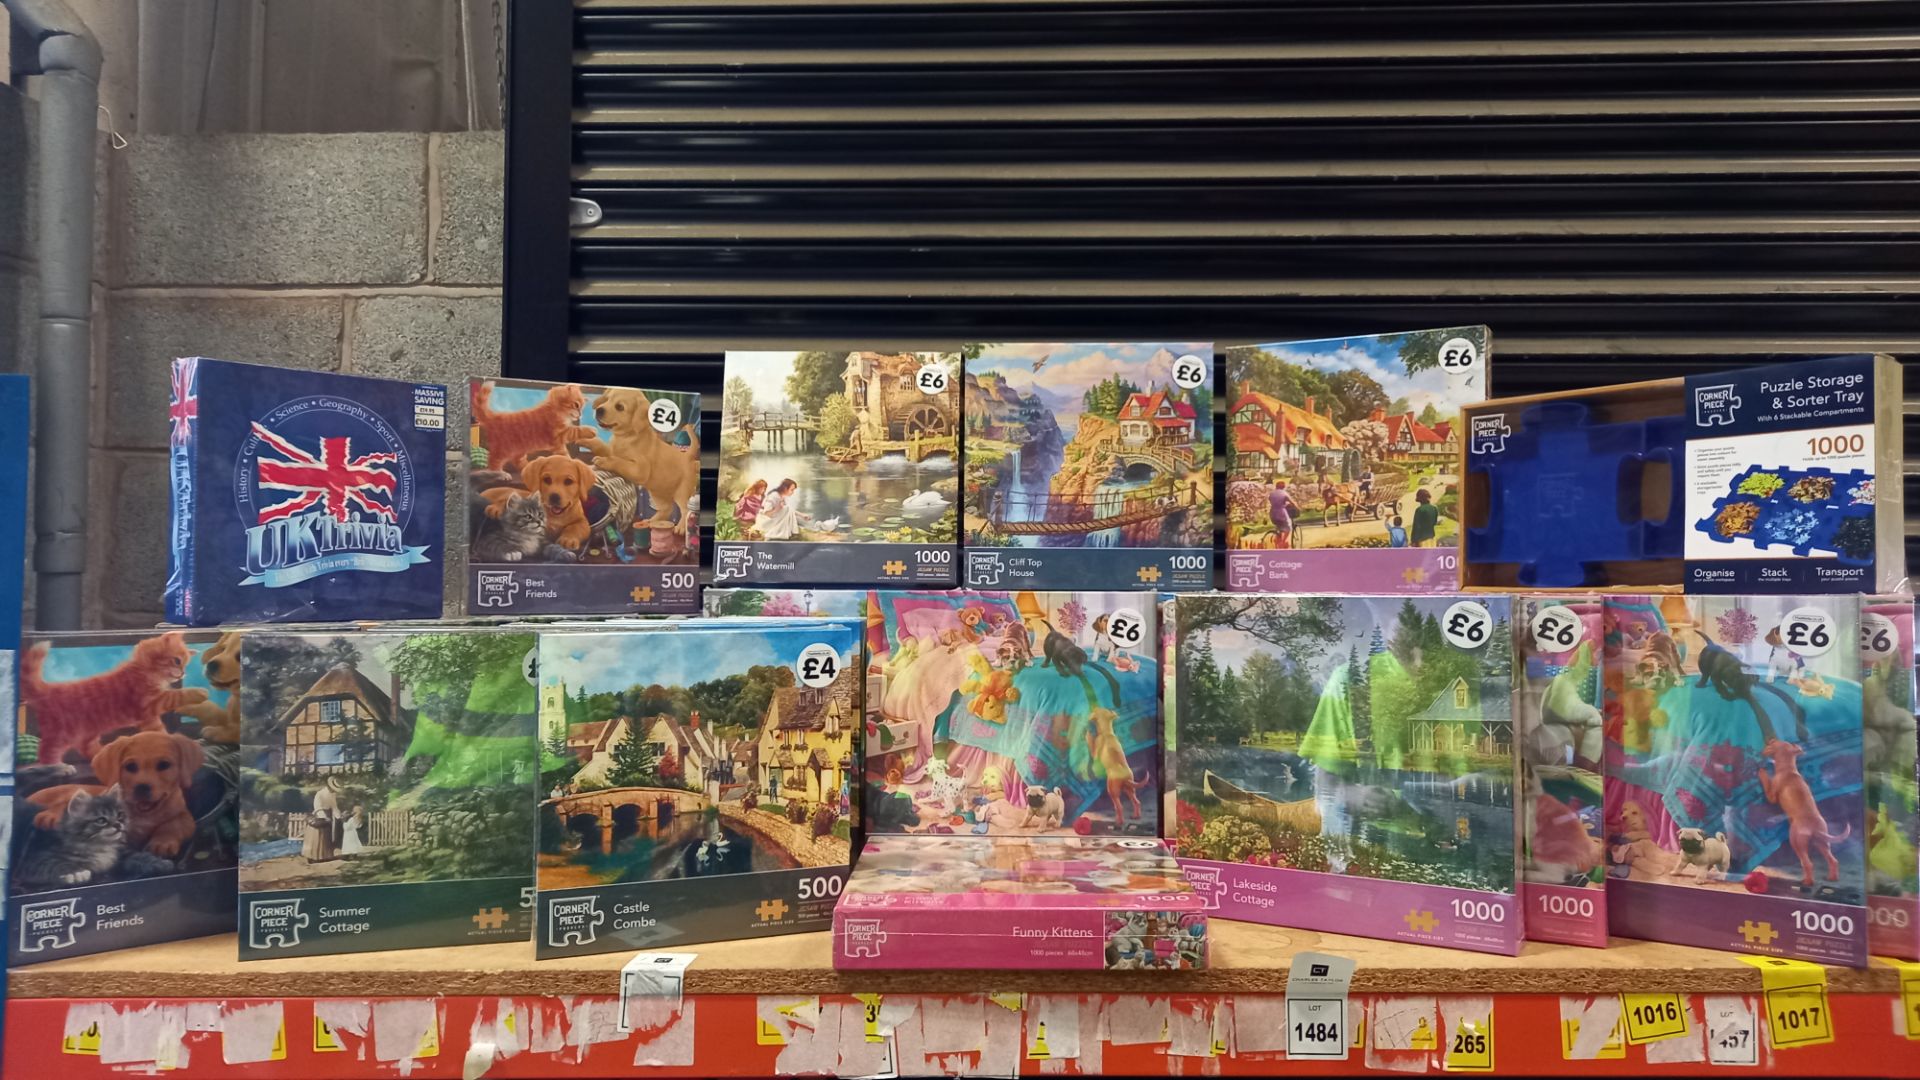 APPROX 40 PIECE LOT OF ASSORTED JIGSAWS IE CASTLE COMBE, SUMMER COTTAGE, DOGS, FUNNY KITTENS,